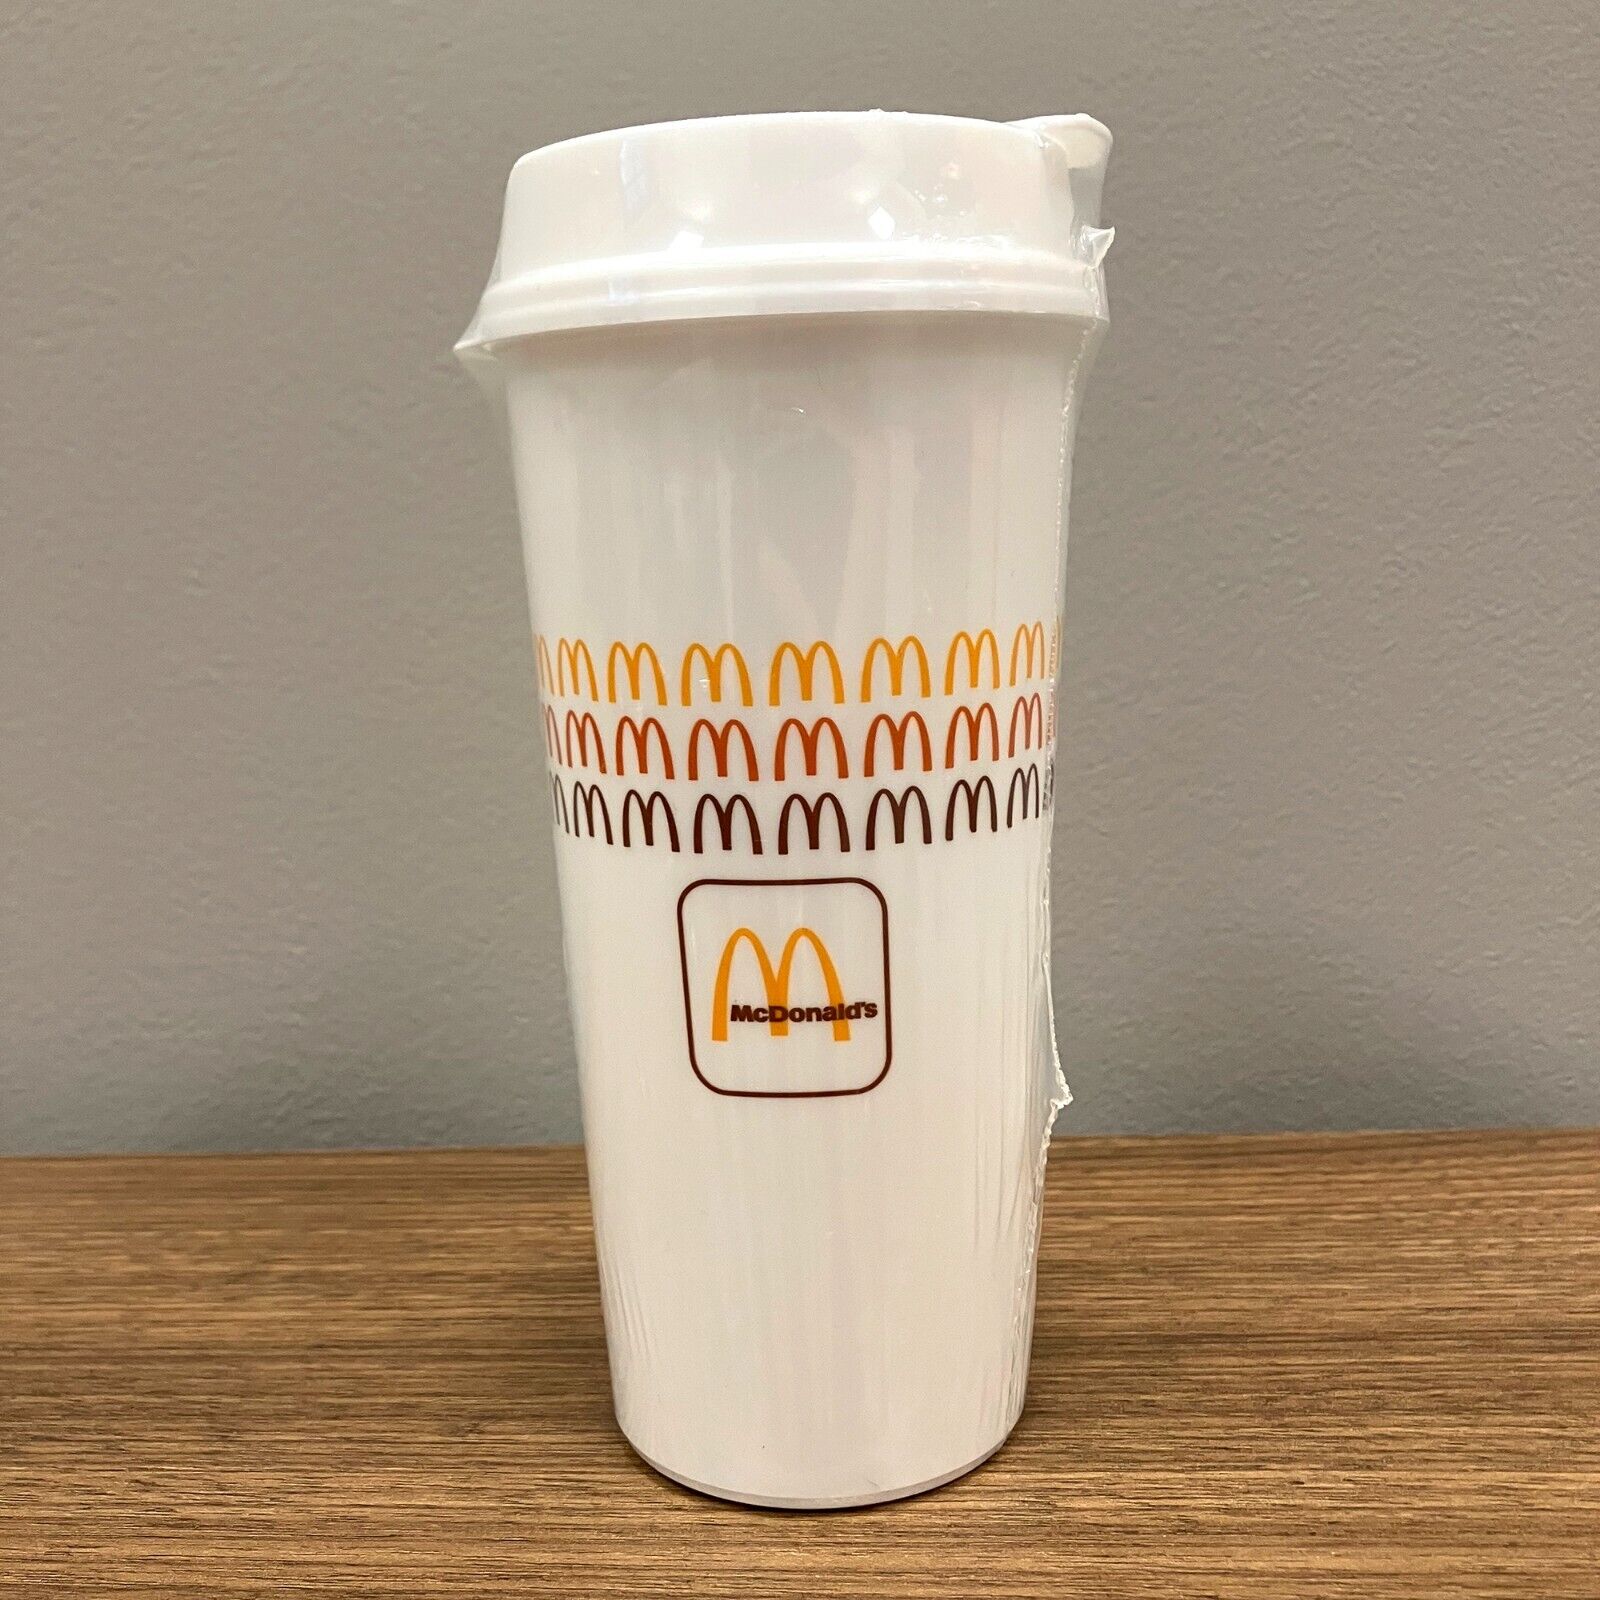 McDonald’s Golden Arches Retro Package Design Thermal Cup 16oz. - NEW